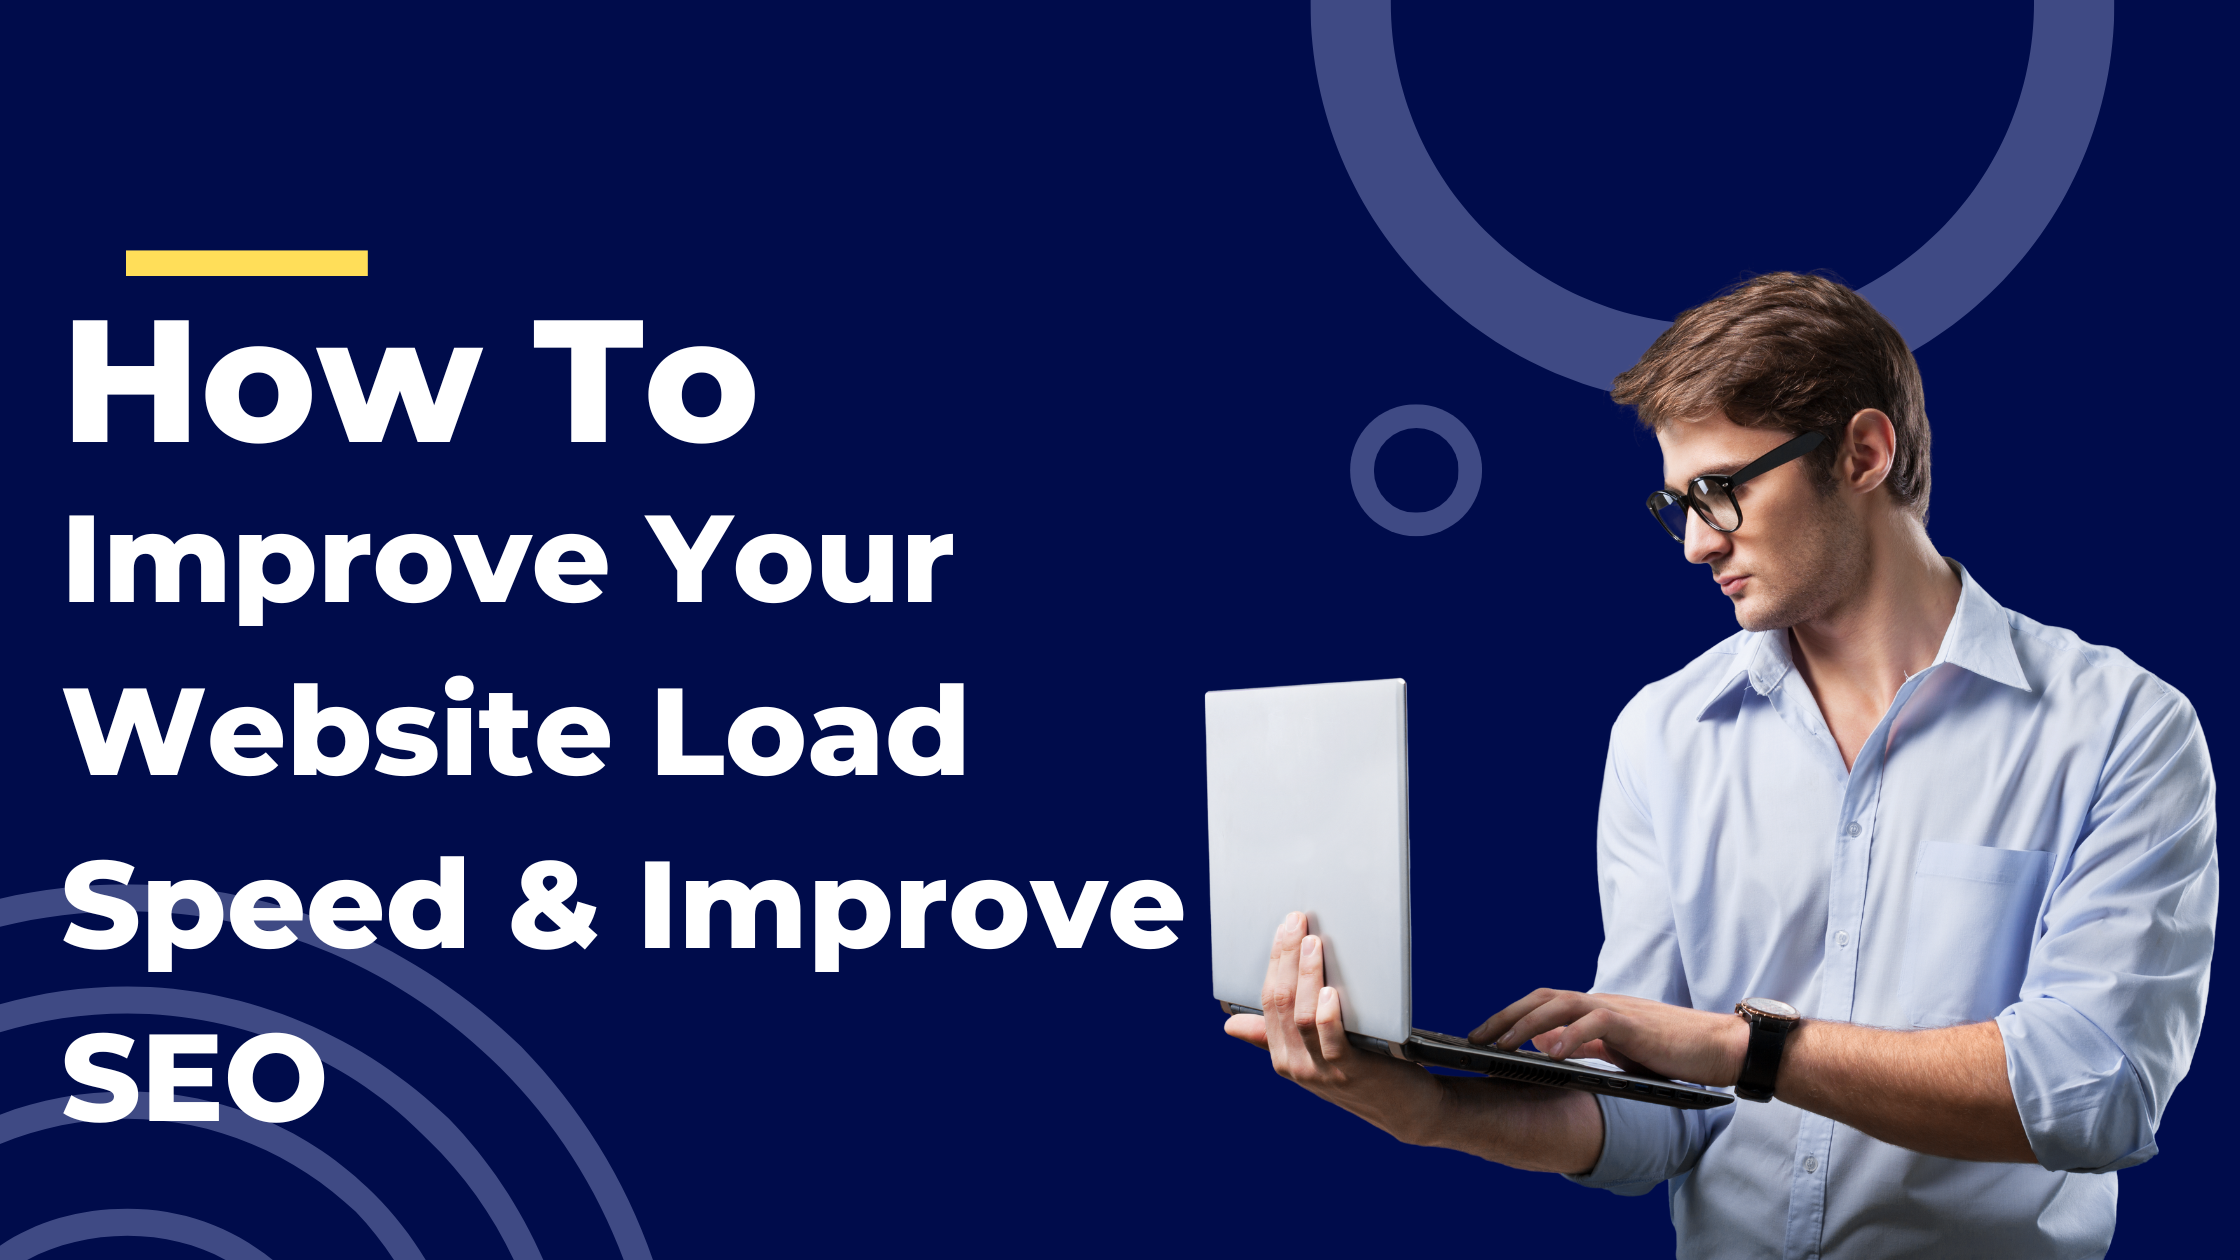 How To Improve Your Website Load Speed & Improve SEO